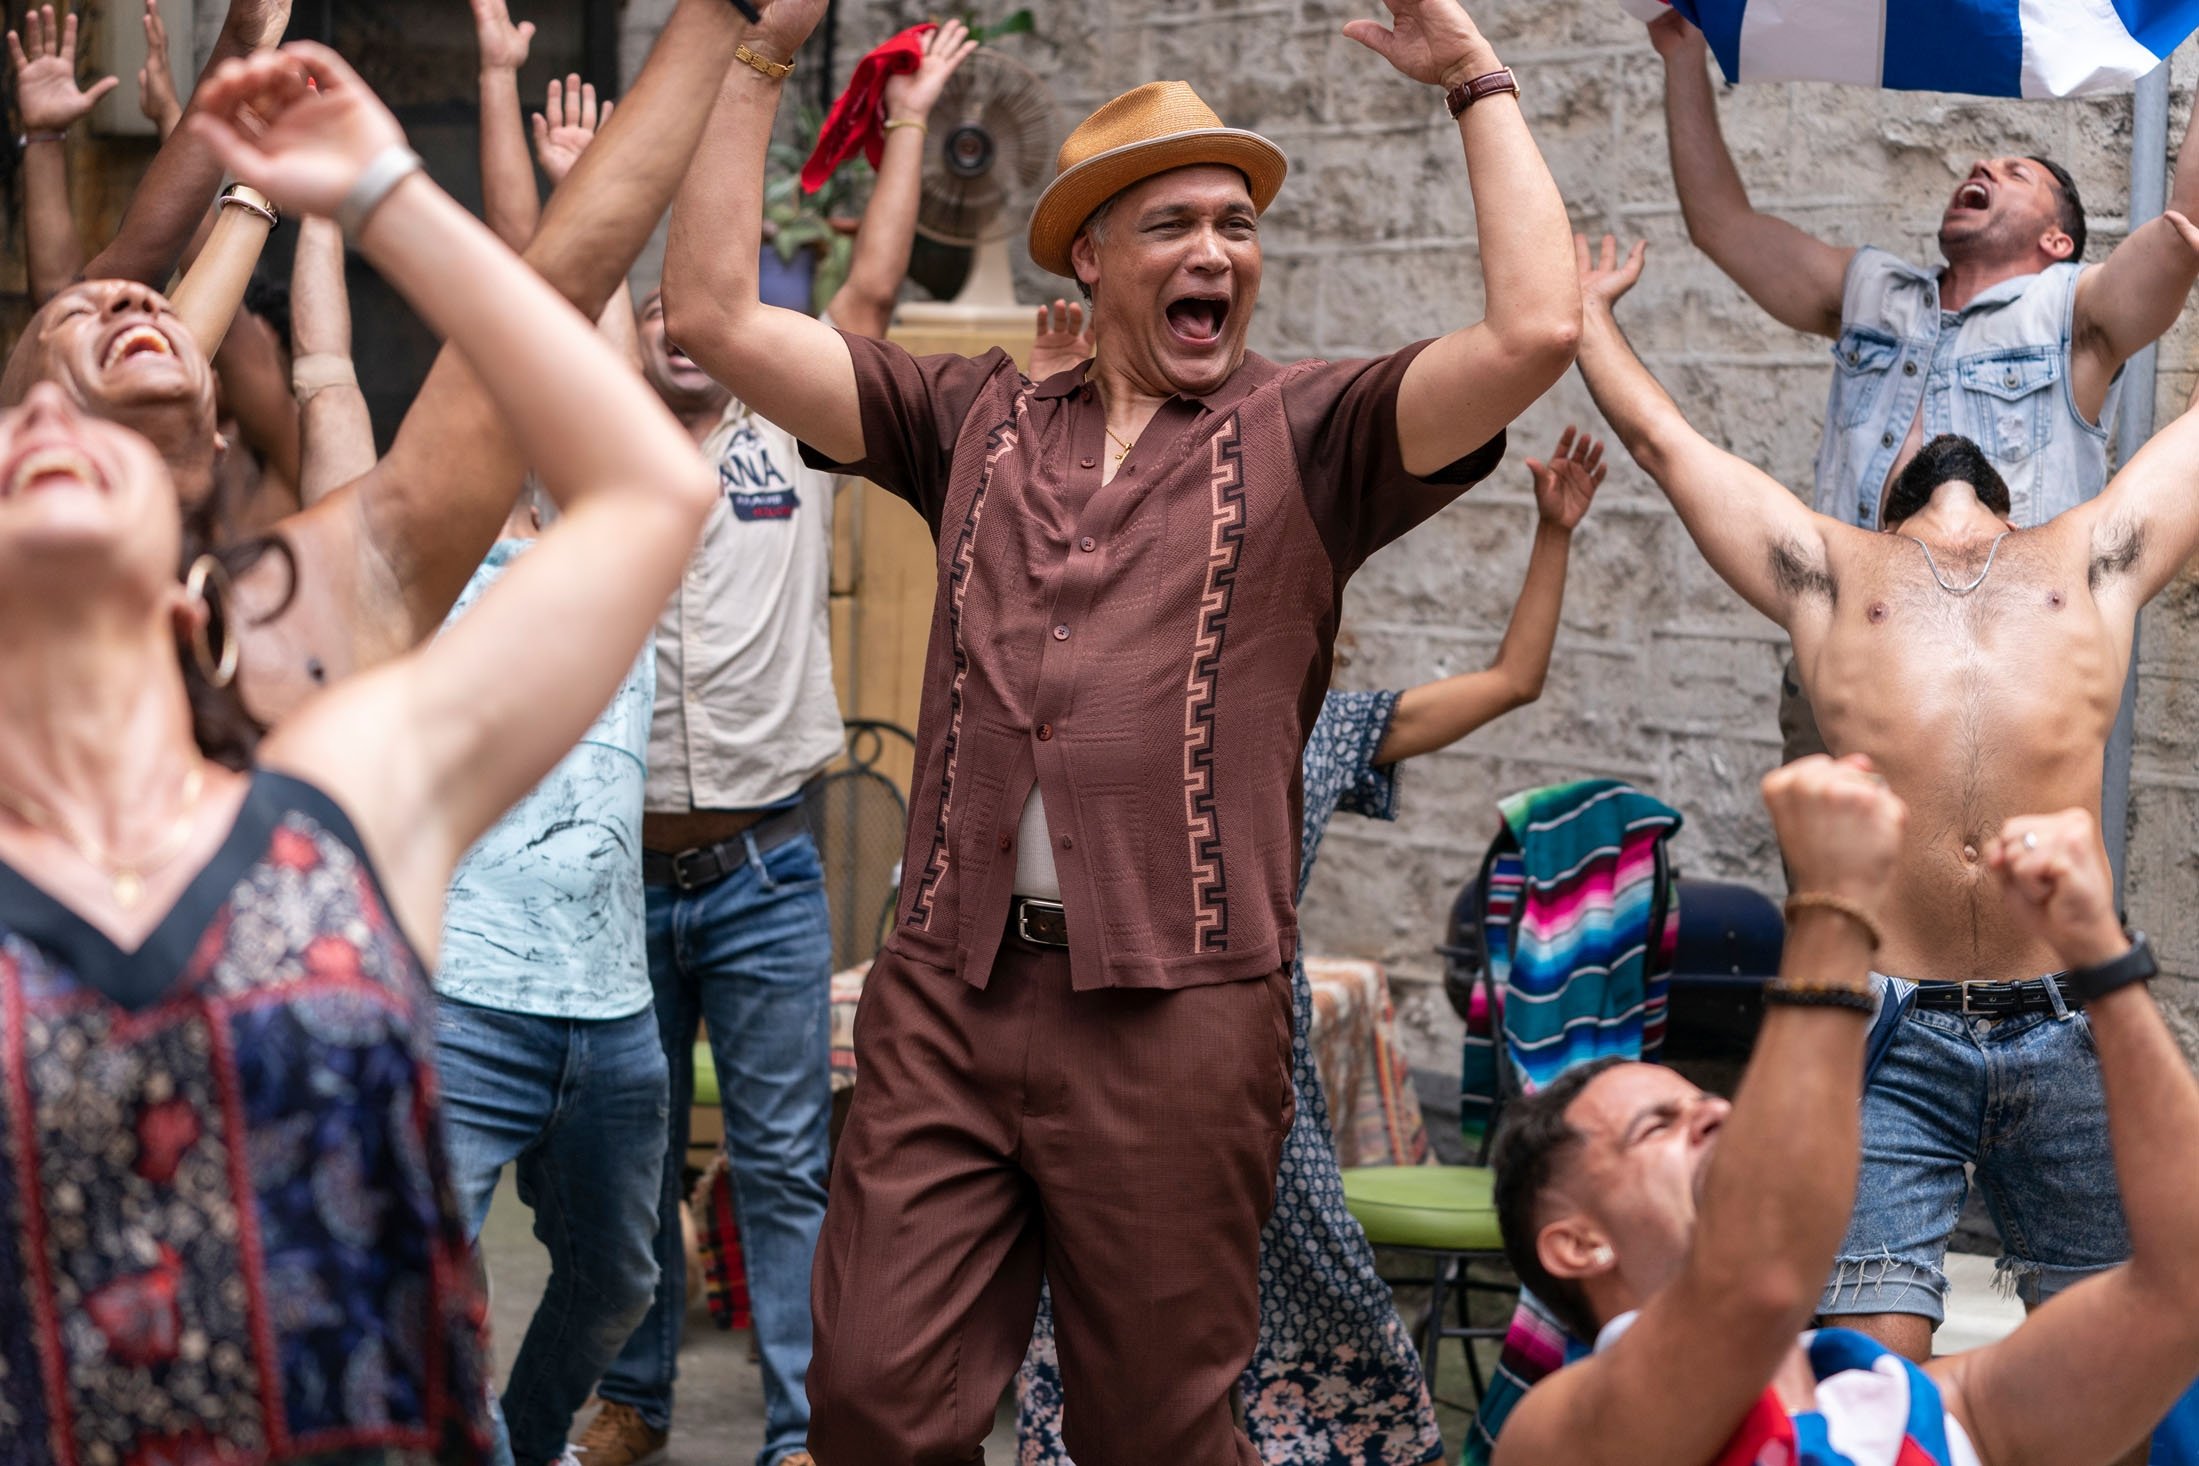 Actor Jimmy Smits (C) celebrates with a crowd in a scene from the musical film "In the Heights." (Warner Bros. via AP)